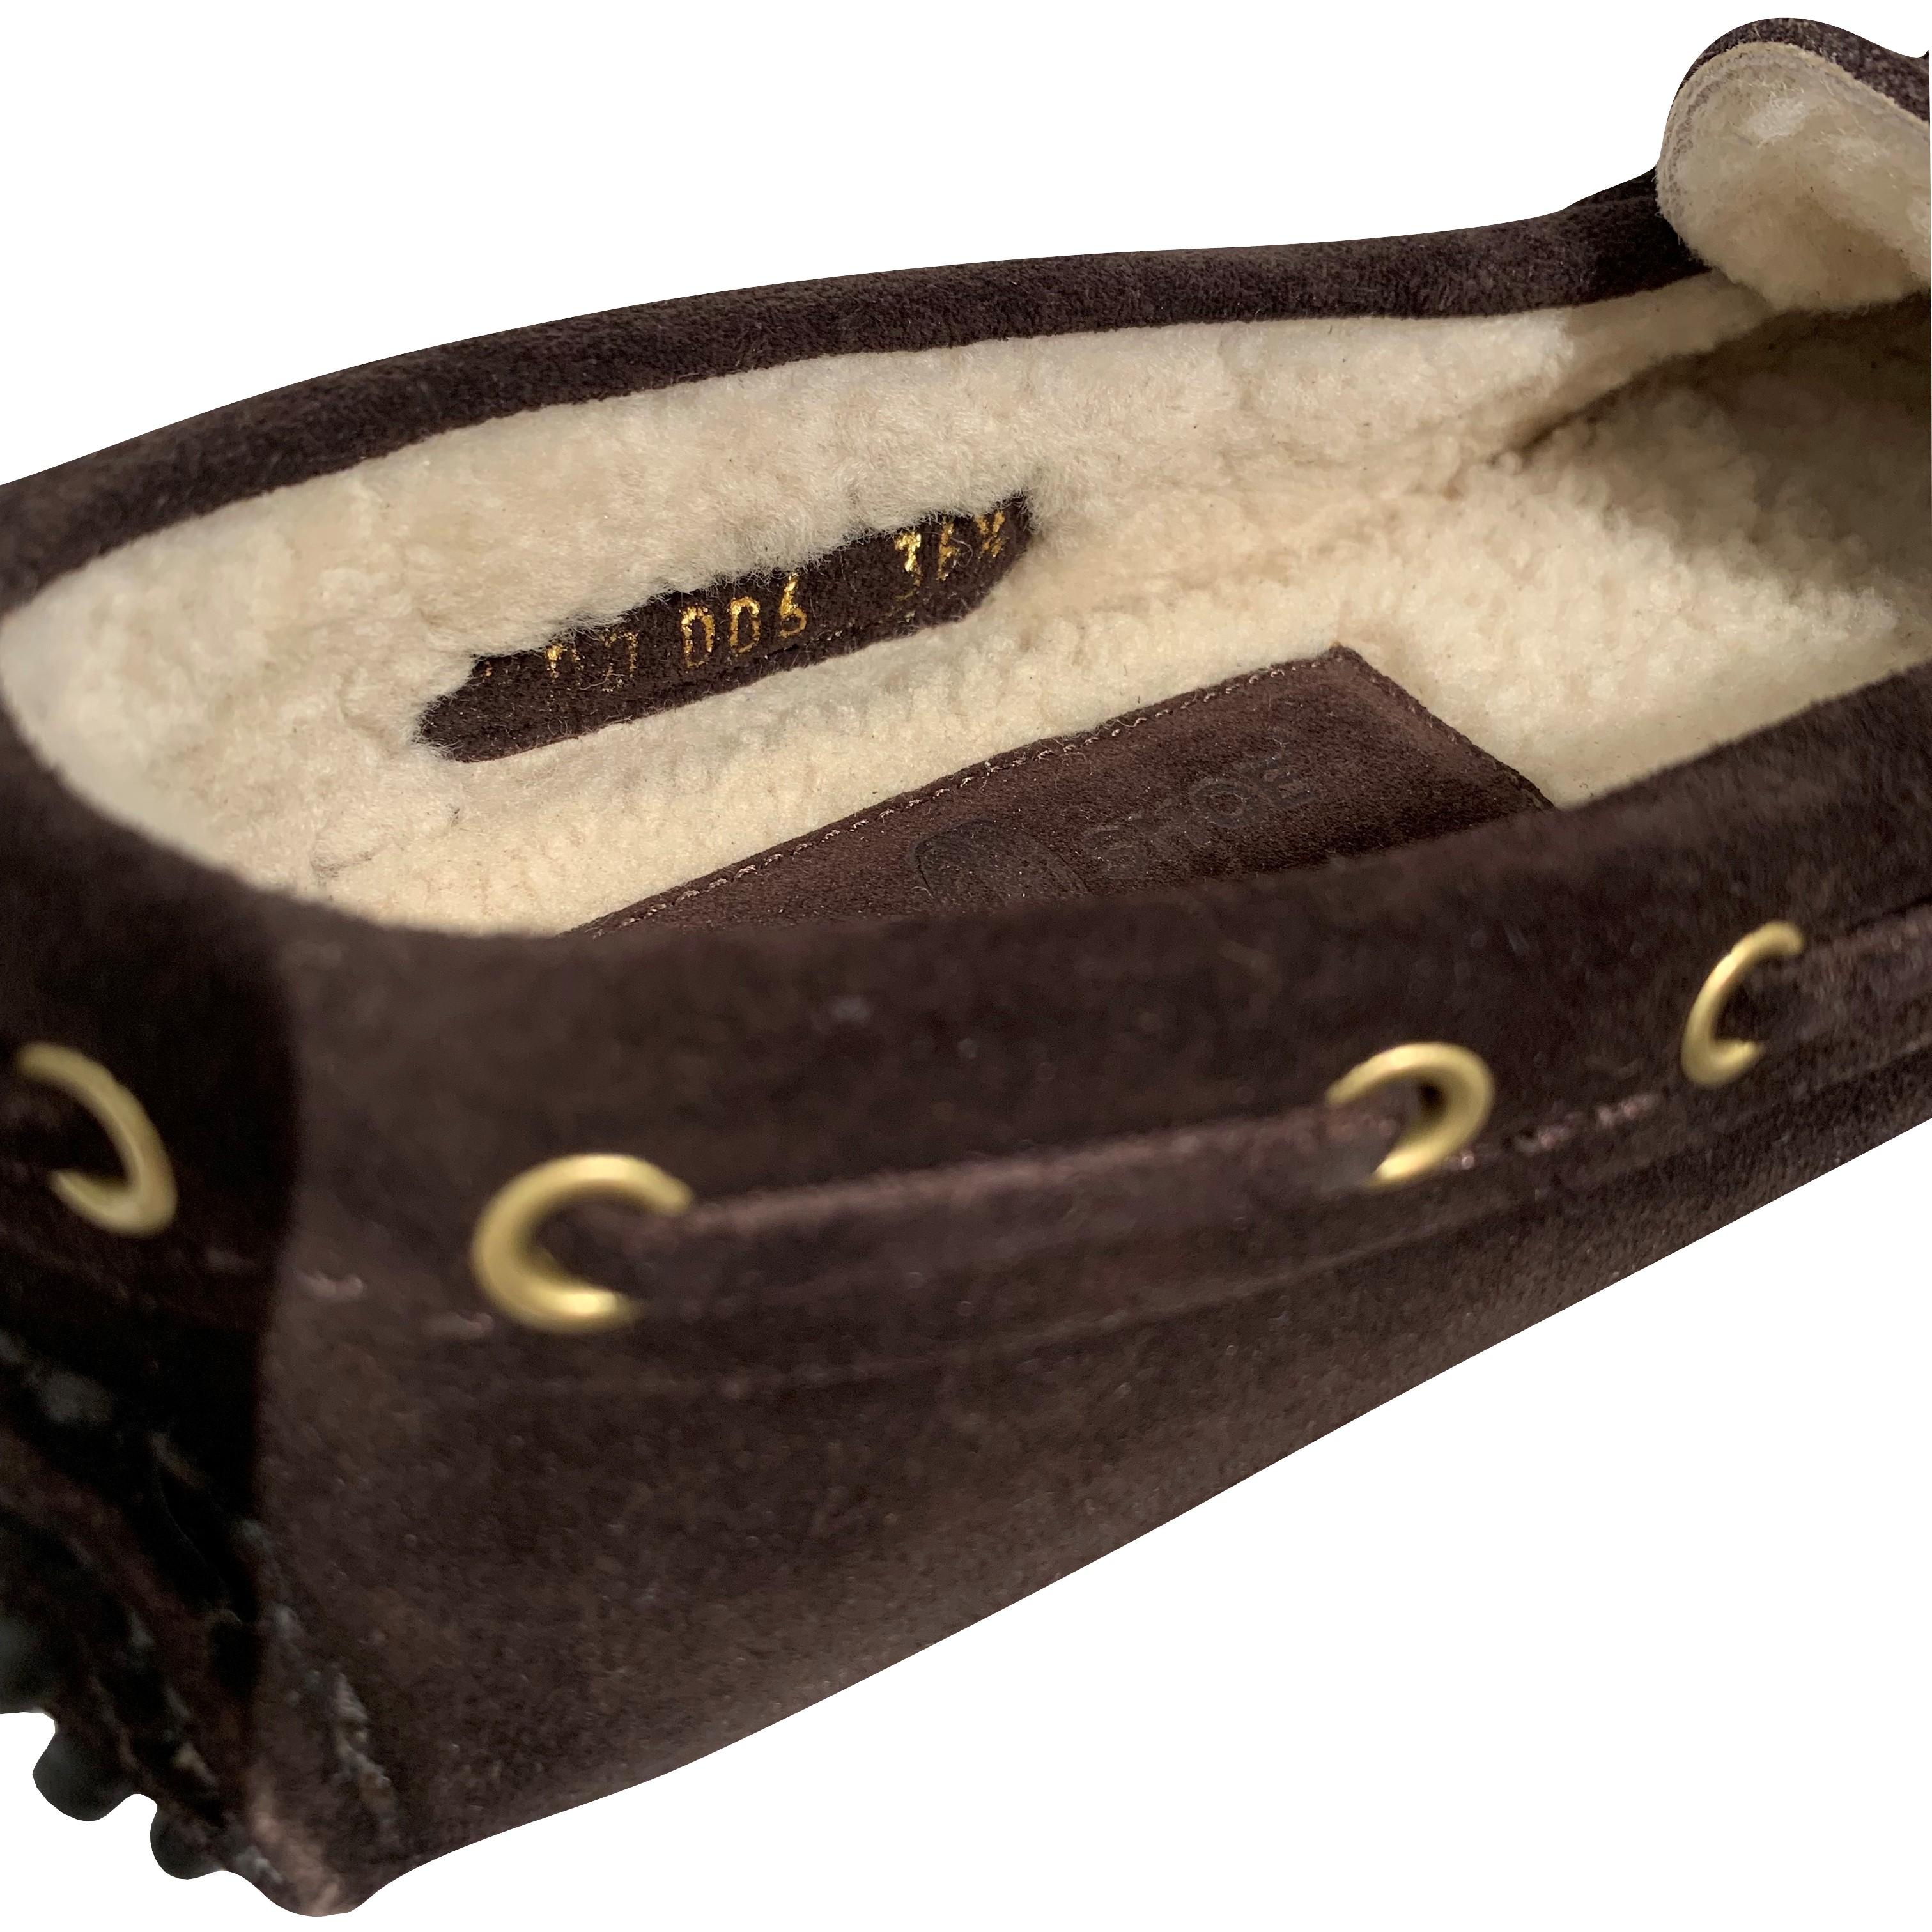 The Original Car Shoe by Prada

Brand New
* Dark Chocolate
* Suede
* Shearling Lining
* Gold Hardware
* Bow Toe
* Flat Heel
* Rubber Bumper Sole
* With Box & Dust Cover